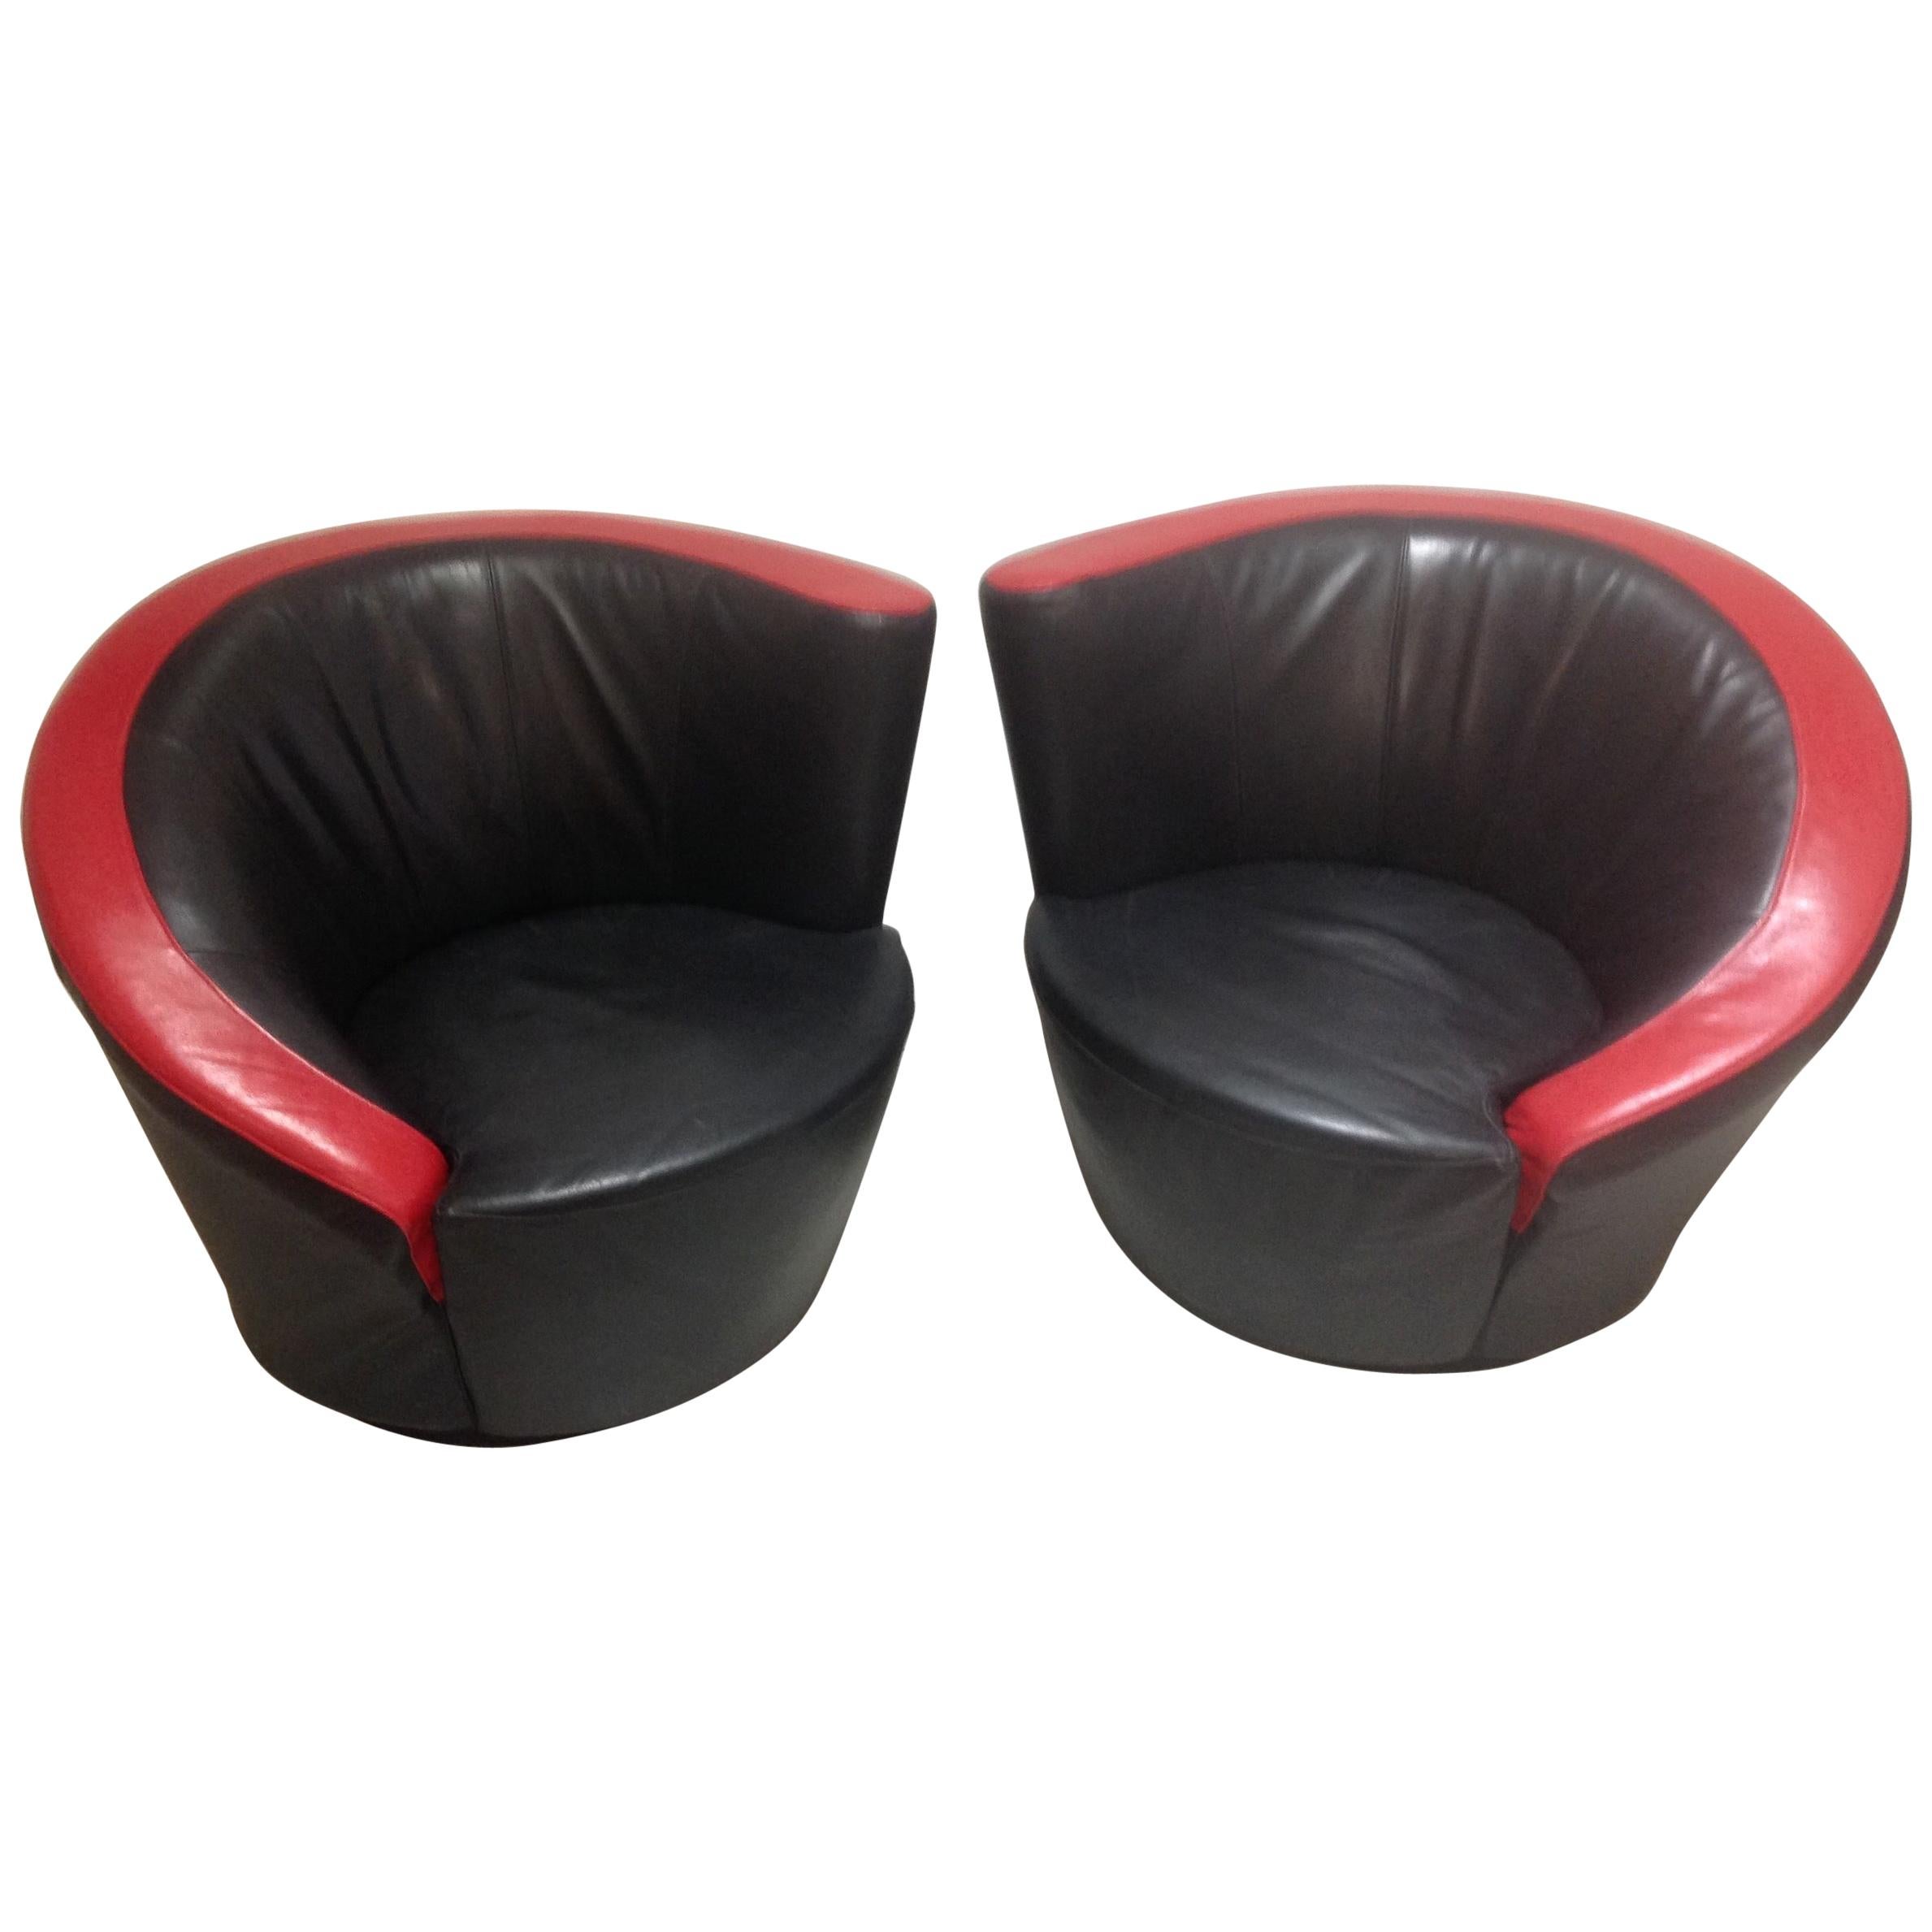 Vladimir Kagan Pair of Black and Red Leather Swivel Lounge Chairs For Sale